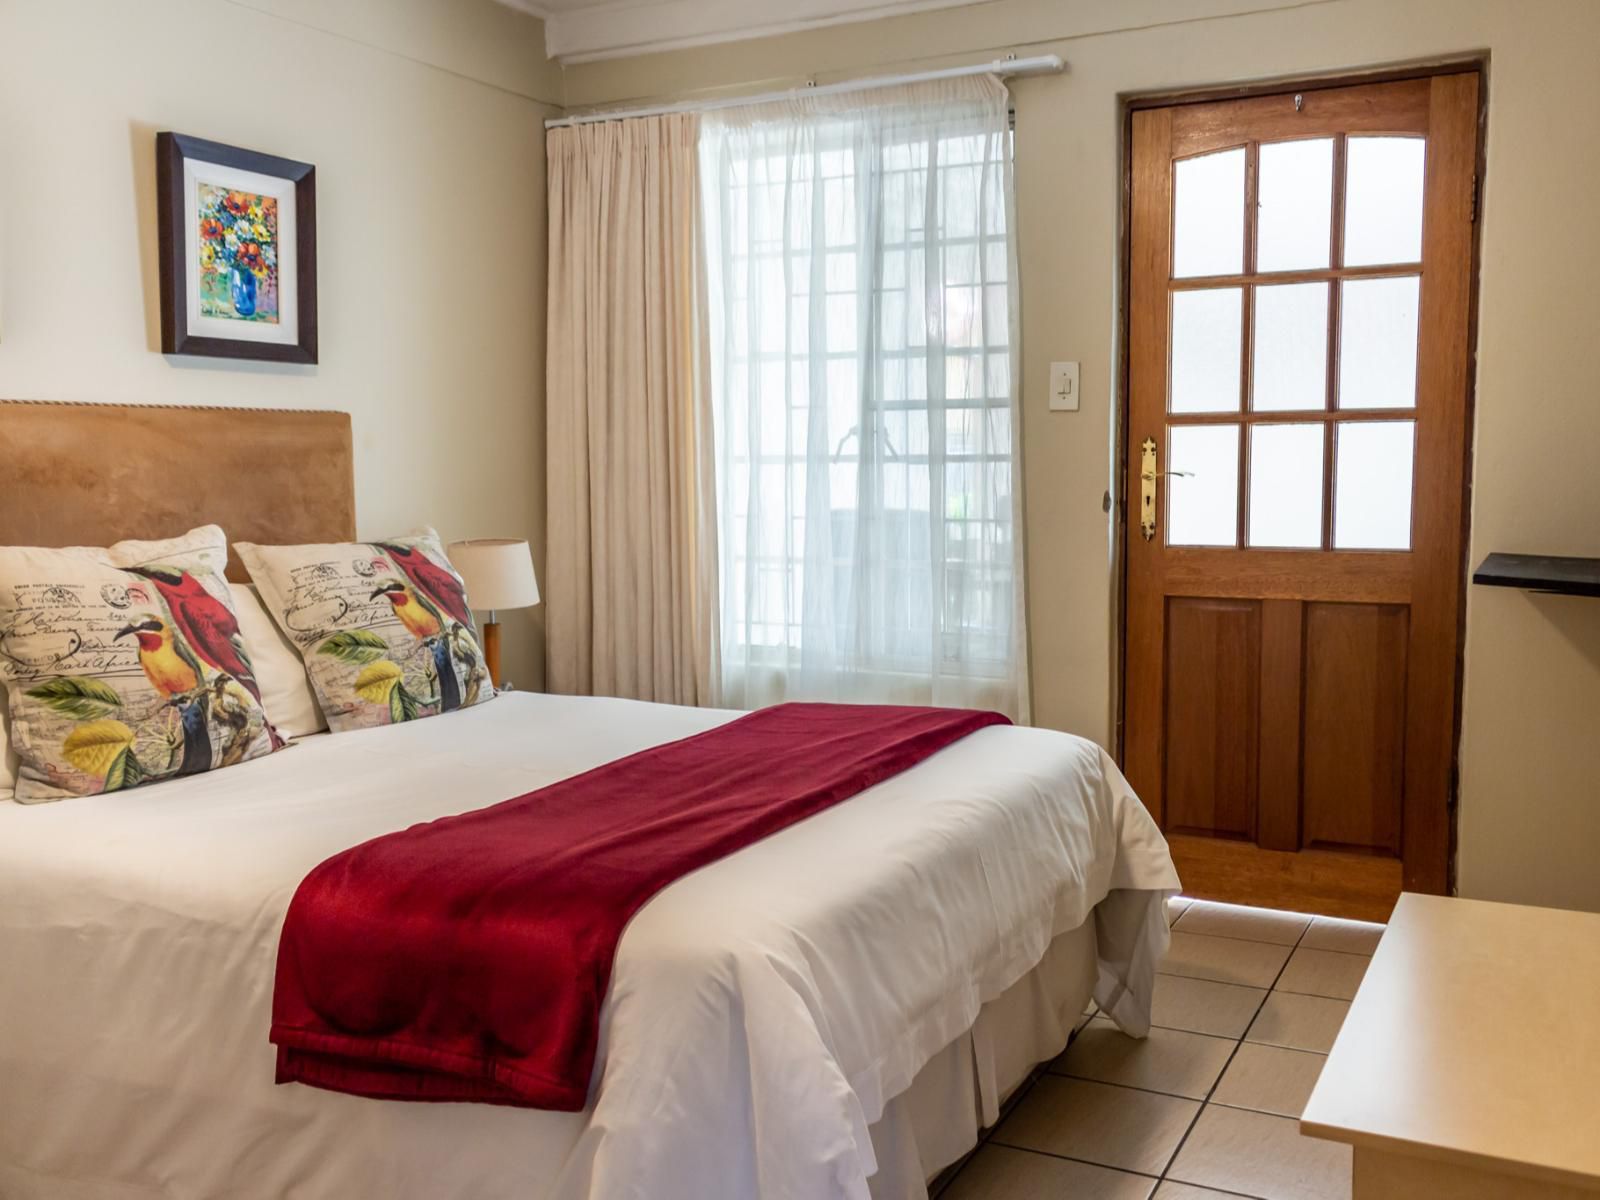 Tuishuis Lodge Clubview Centurion Gauteng South Africa Bedroom